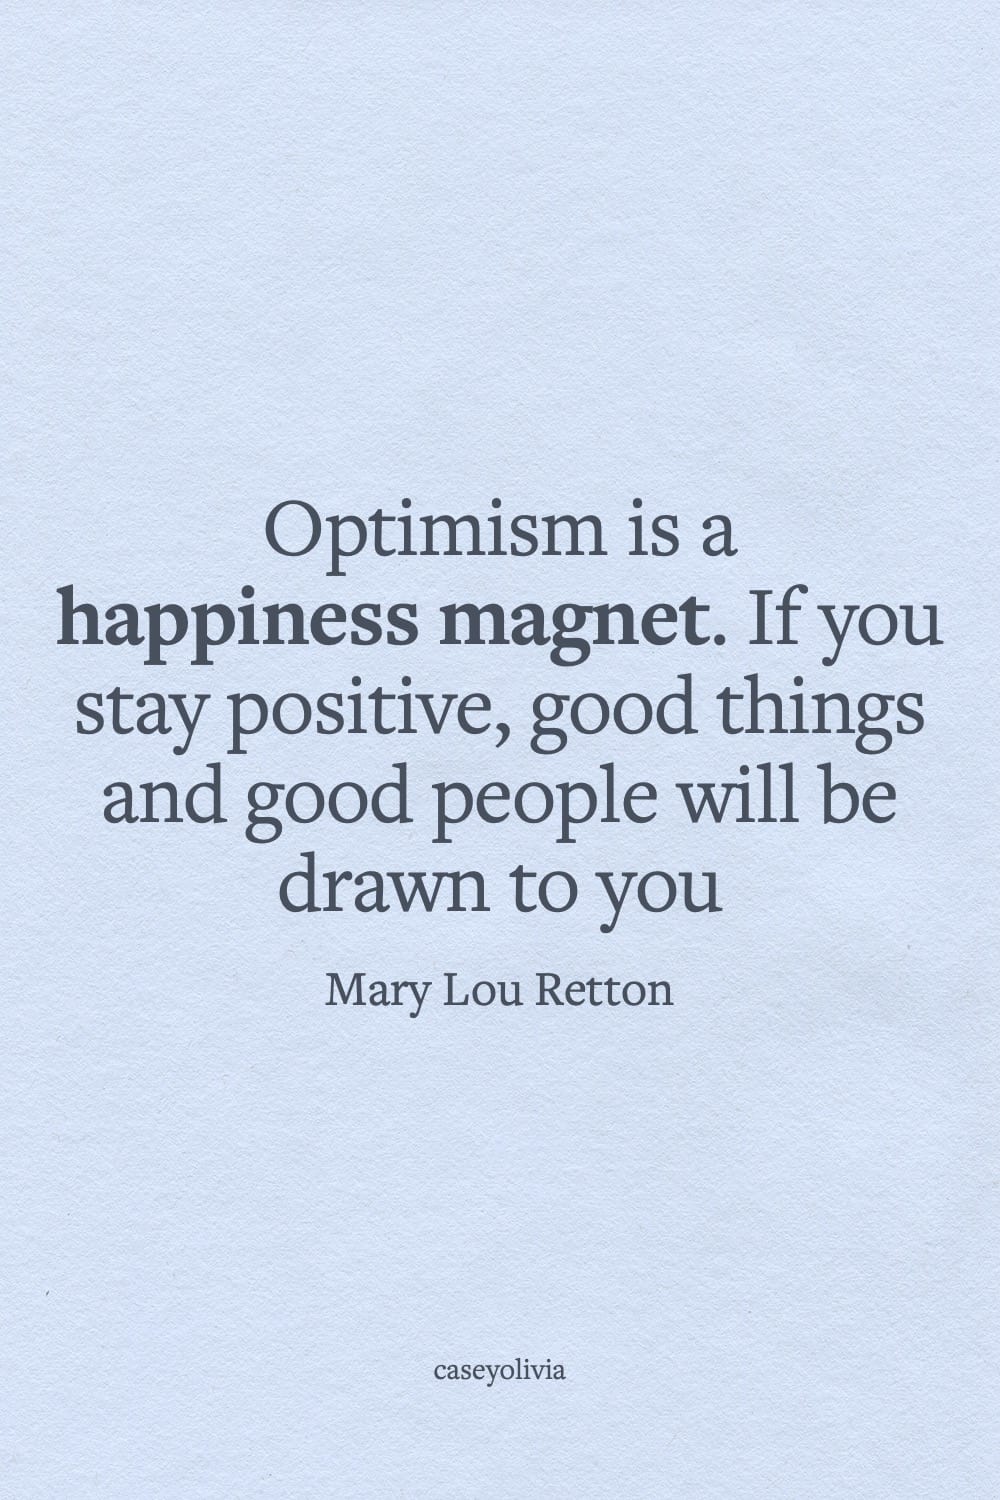 mary lou retton optimism is a happiness magnet quote